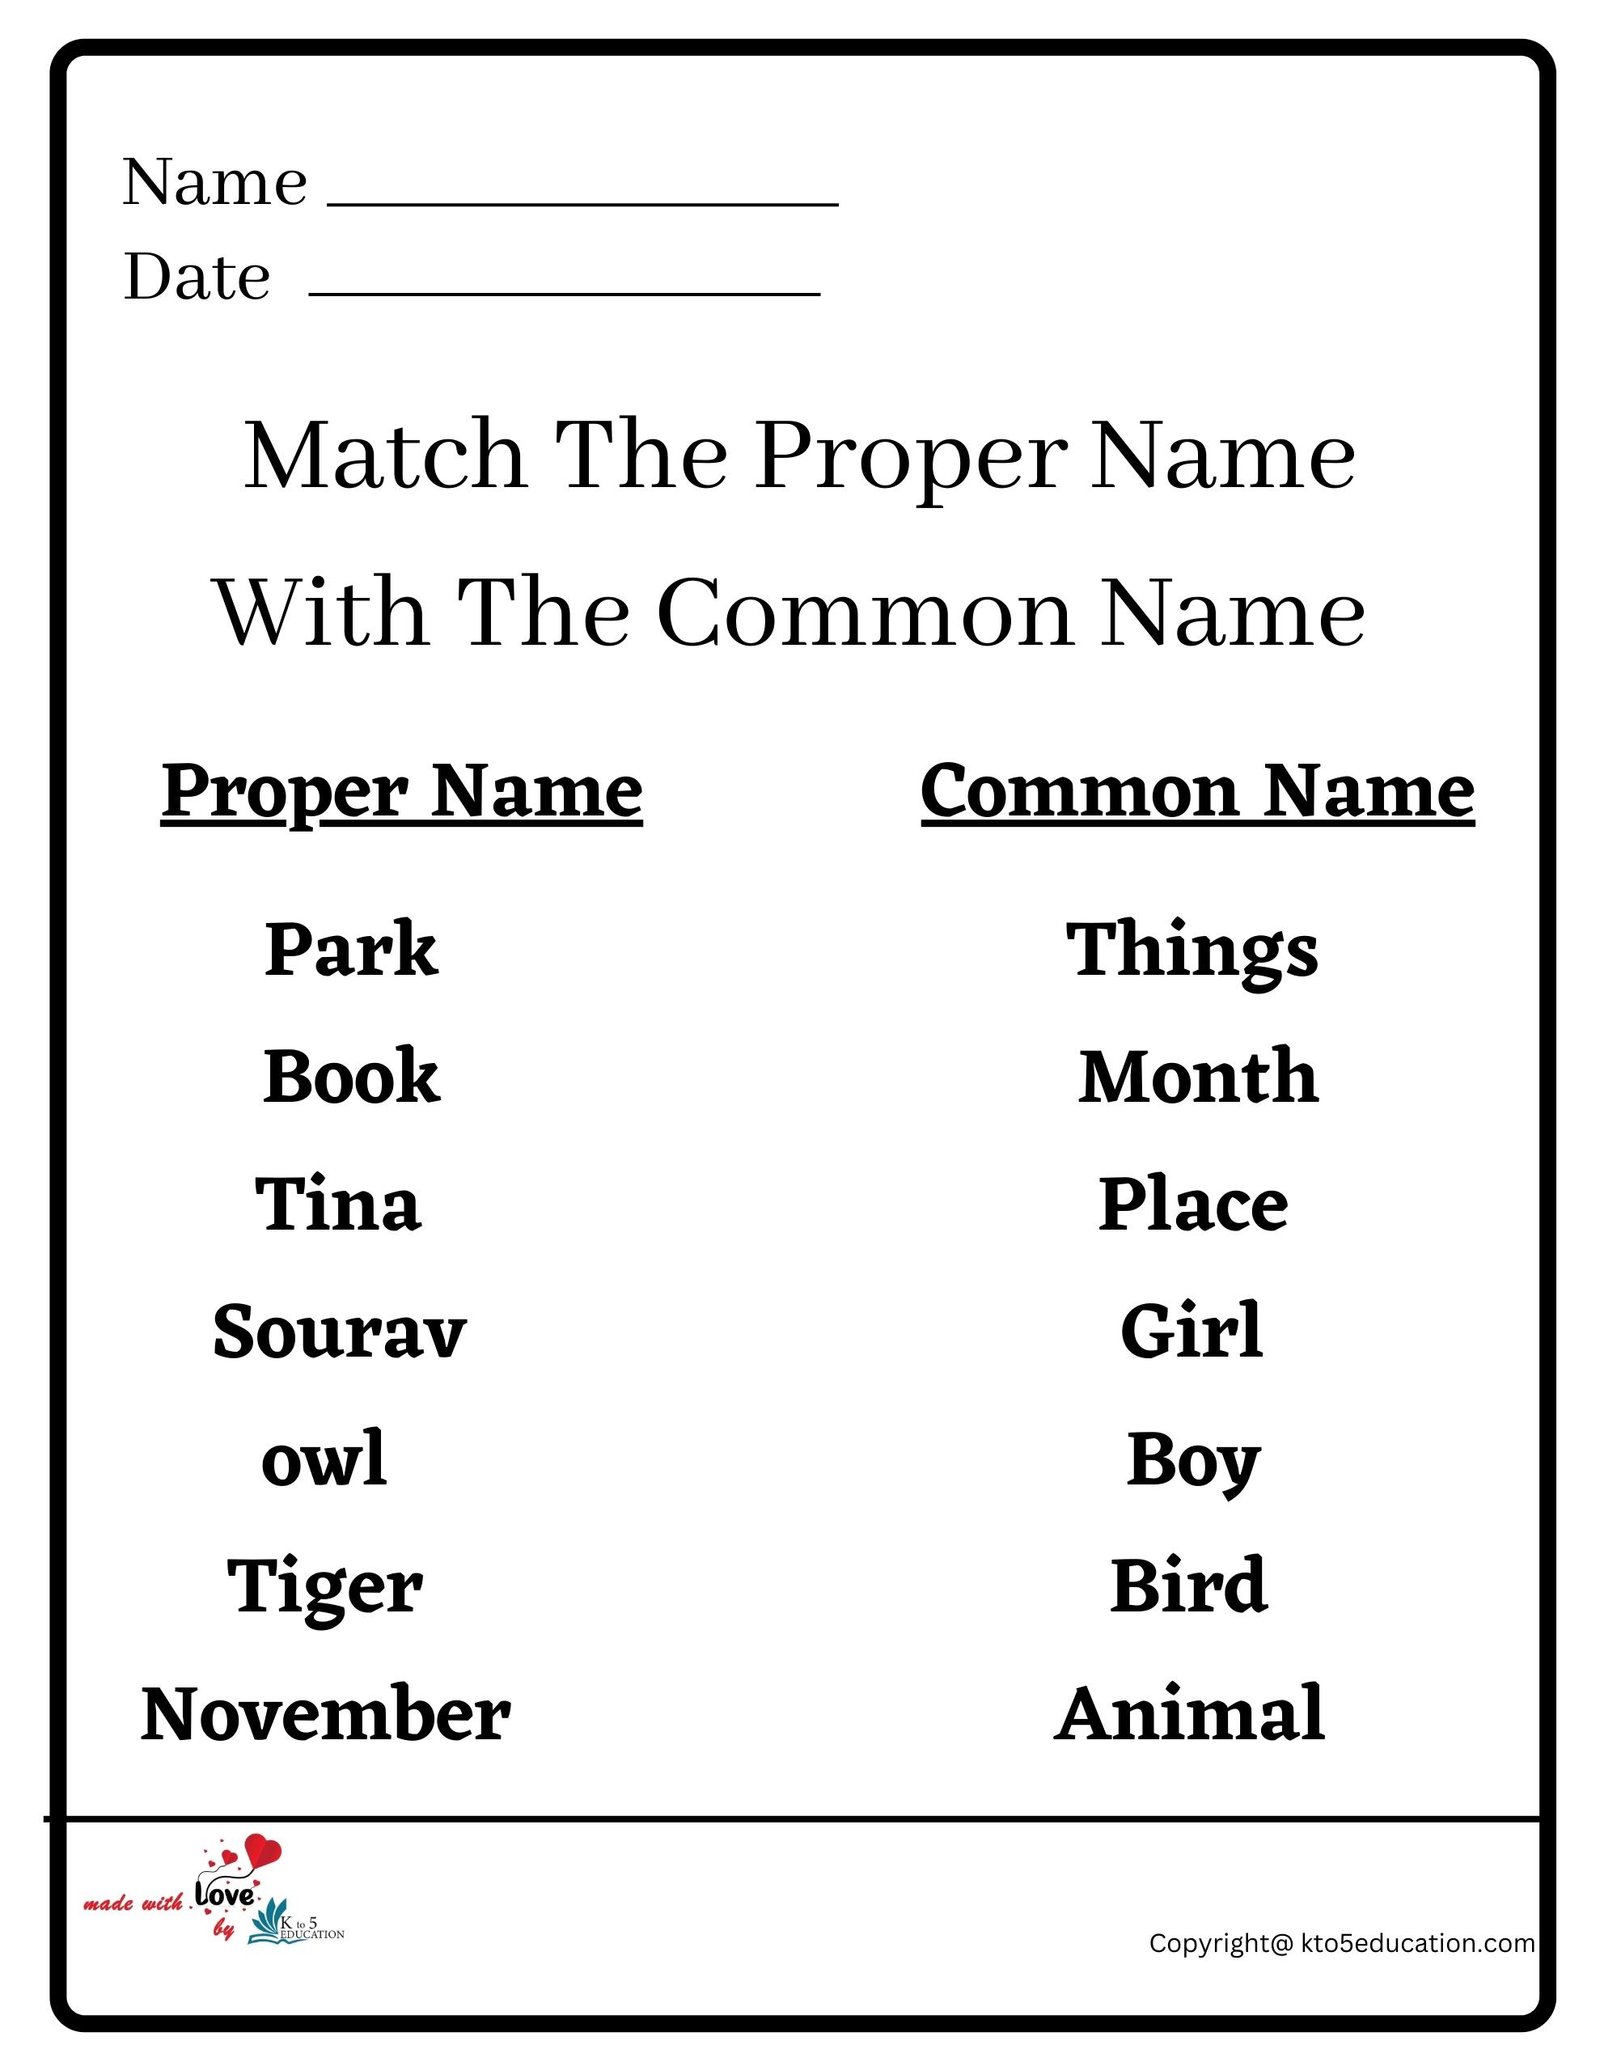 Match The Proper Name With The Common Name Worksheet 2